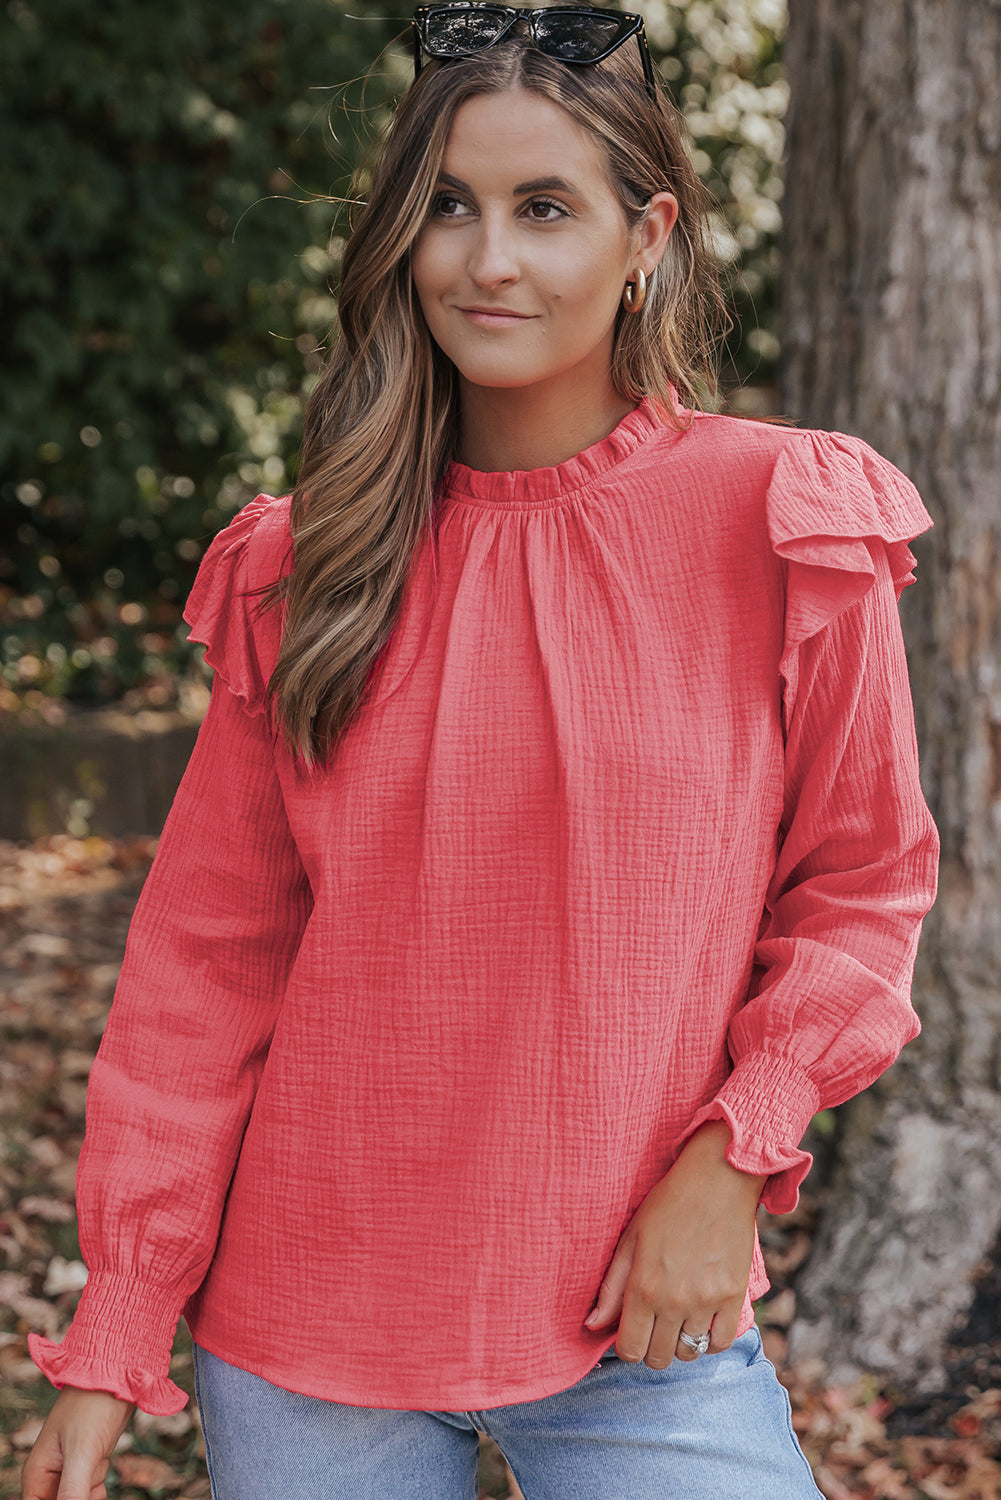 Rose Crinkled Textured Ruffled Puff Sleeve Blouse